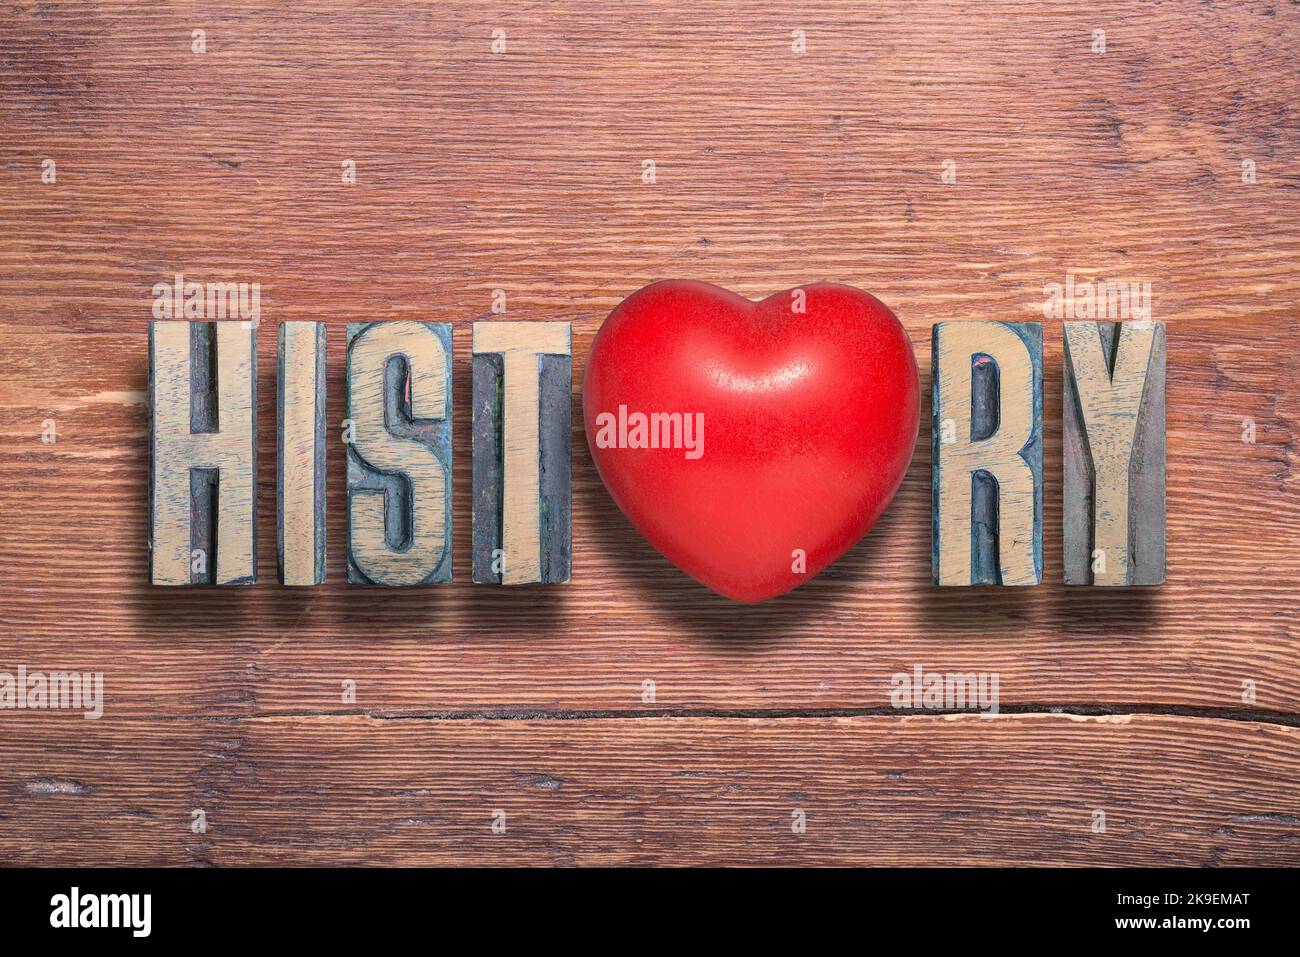 history word combined on vintage varnished wooden surface with heart symbol inside Stock Photo